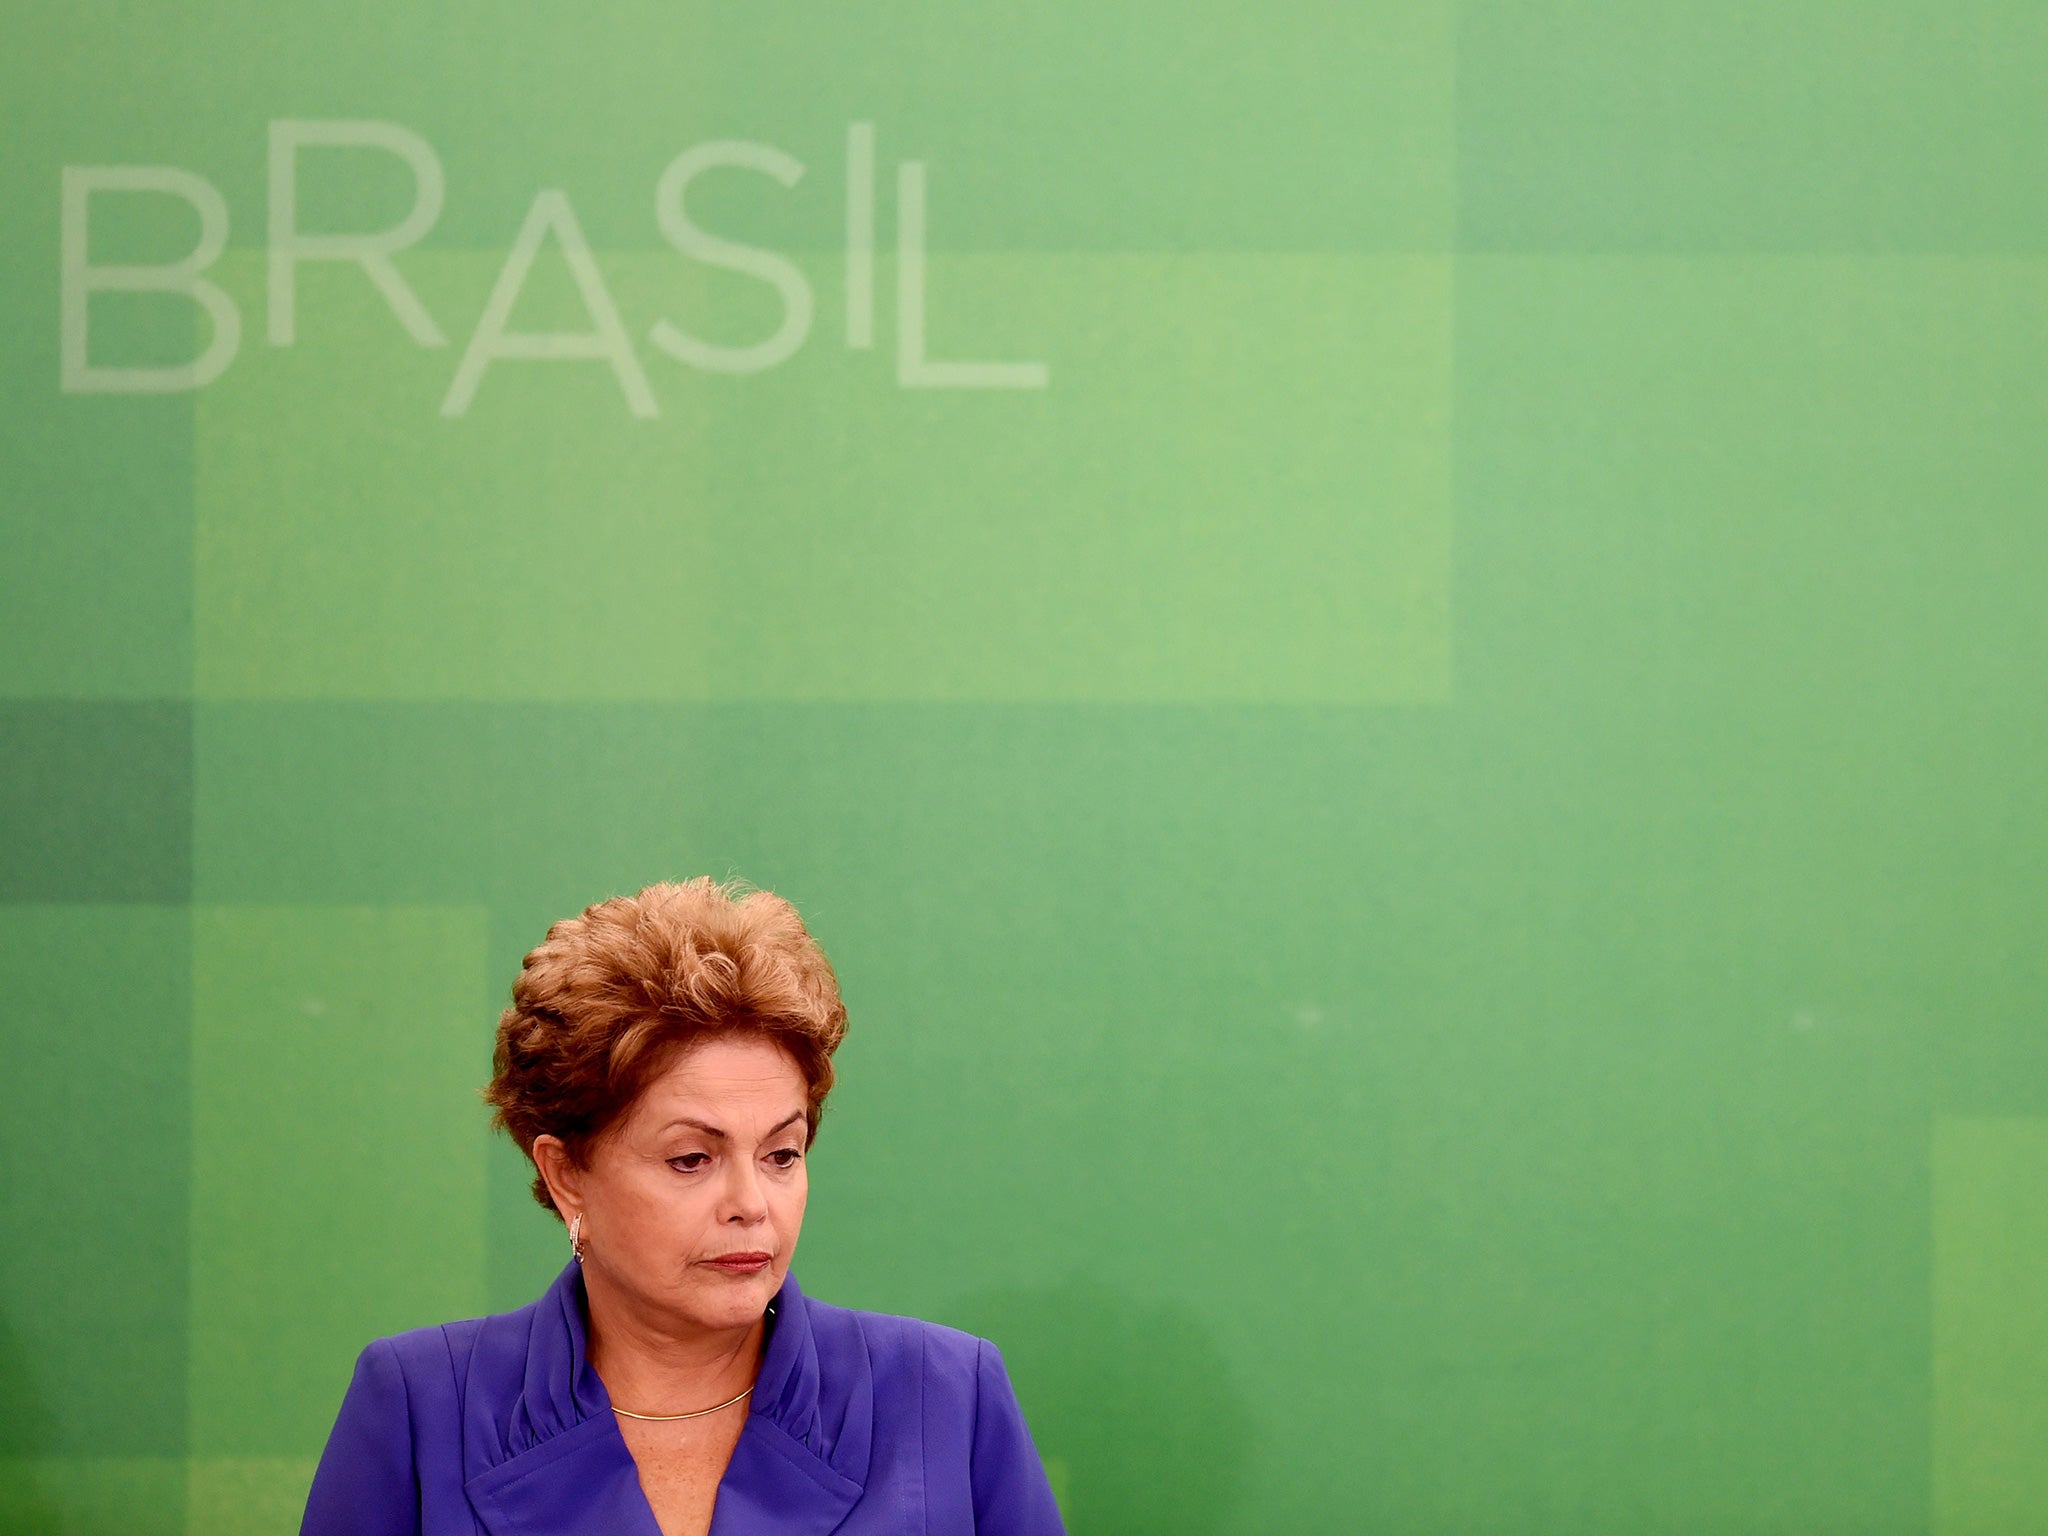 The impeachment effort comes as Brazil's economy is expected to contract more than 3.5 percent this year